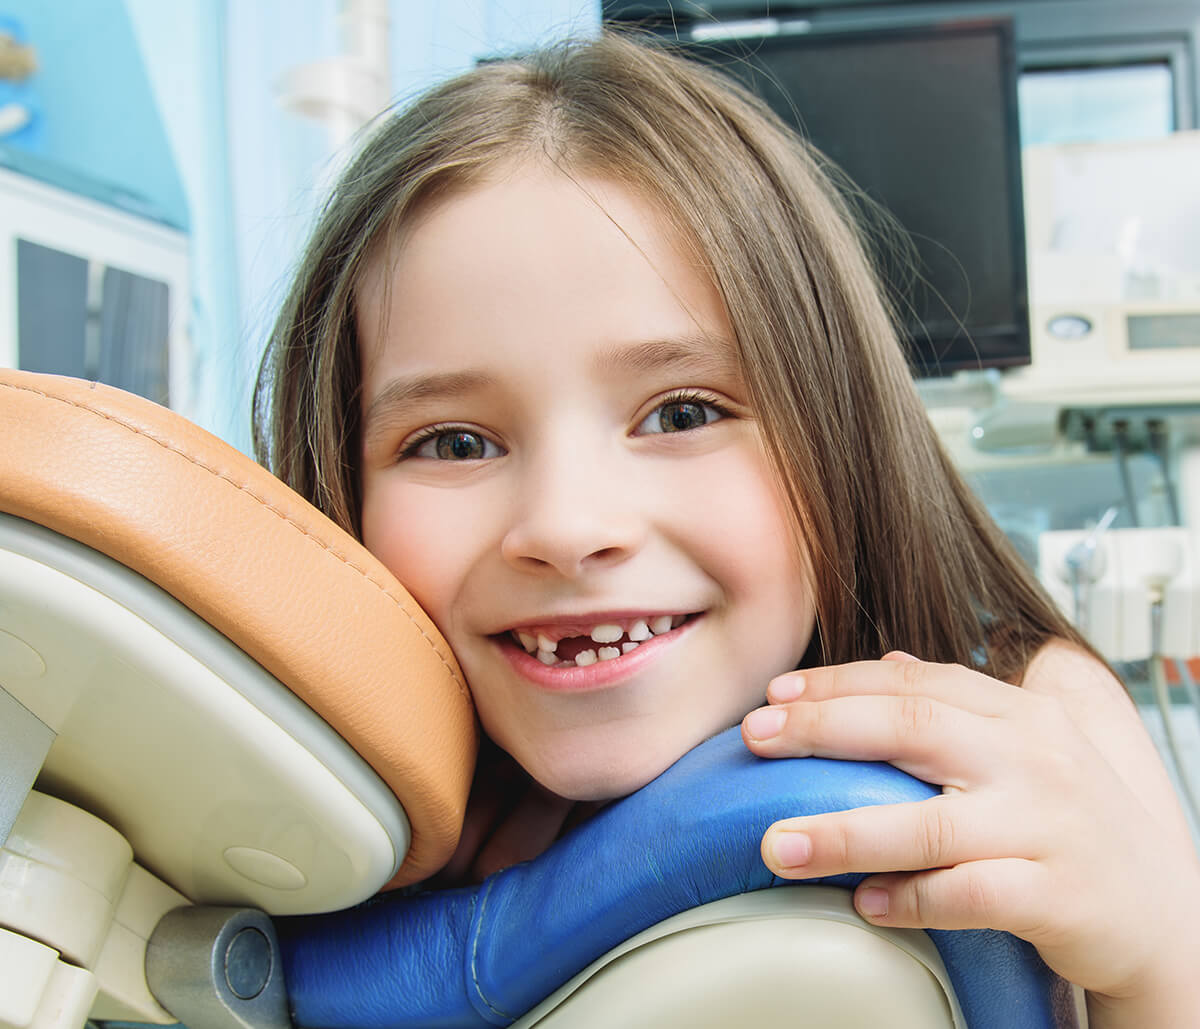 Medicaid Dentist in Fort Worth, TX Area Answers for What Pediatric Dental Care Does My Child Need?